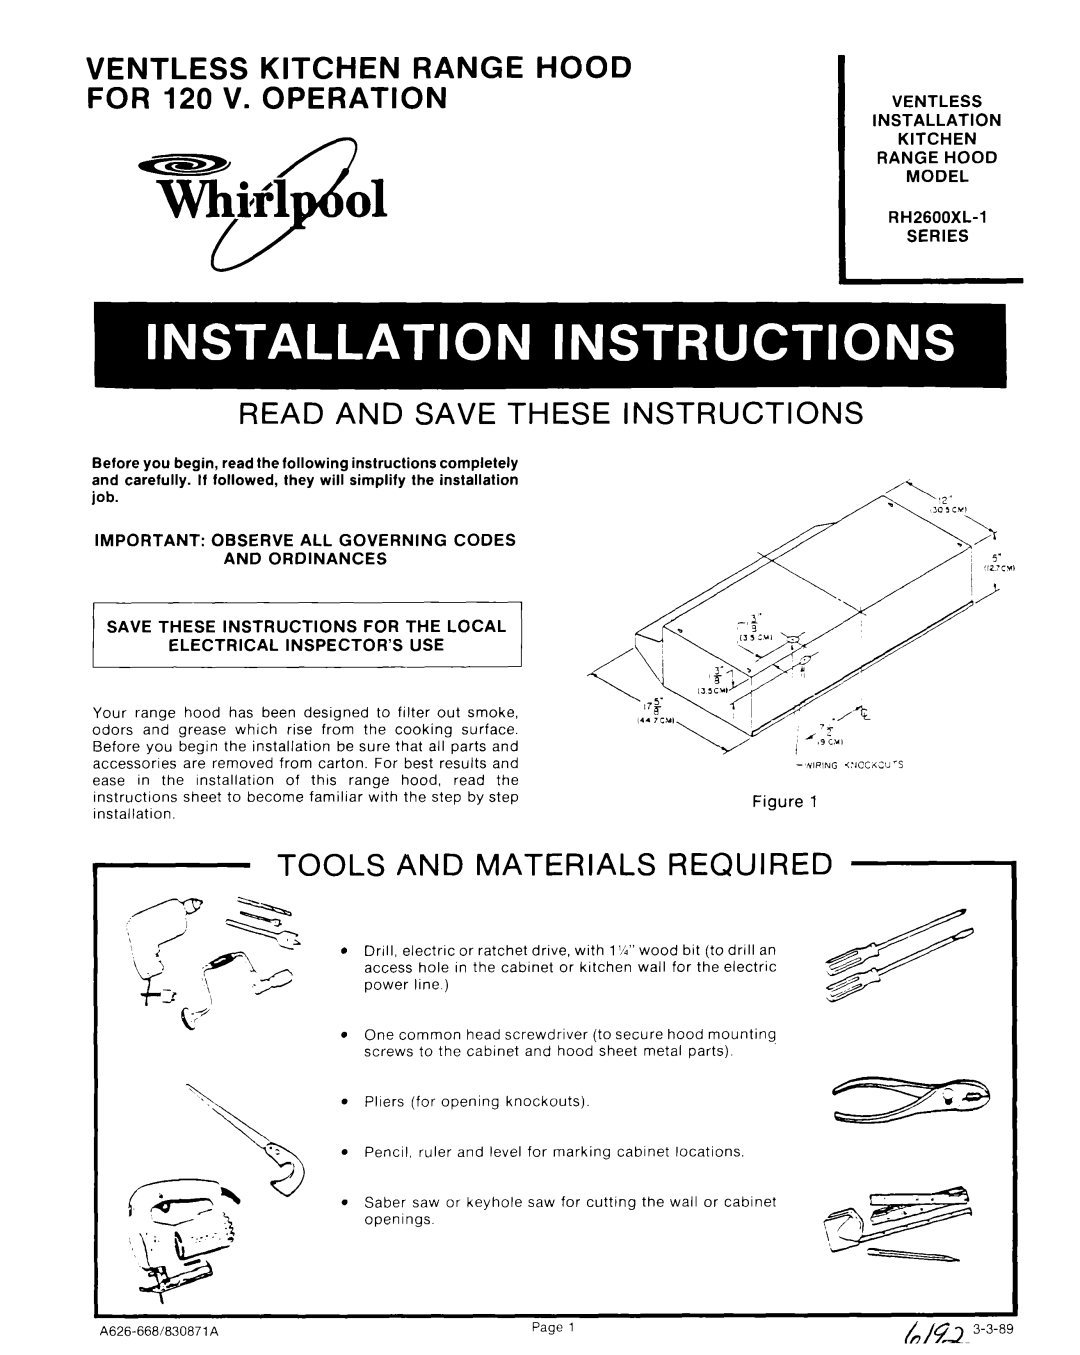 Whirlpool RH2600XL-1 manual VENTLESS KITCHEN RANGE HOOD FOR 120 V. OPERATION, Read And Save These Instructions 